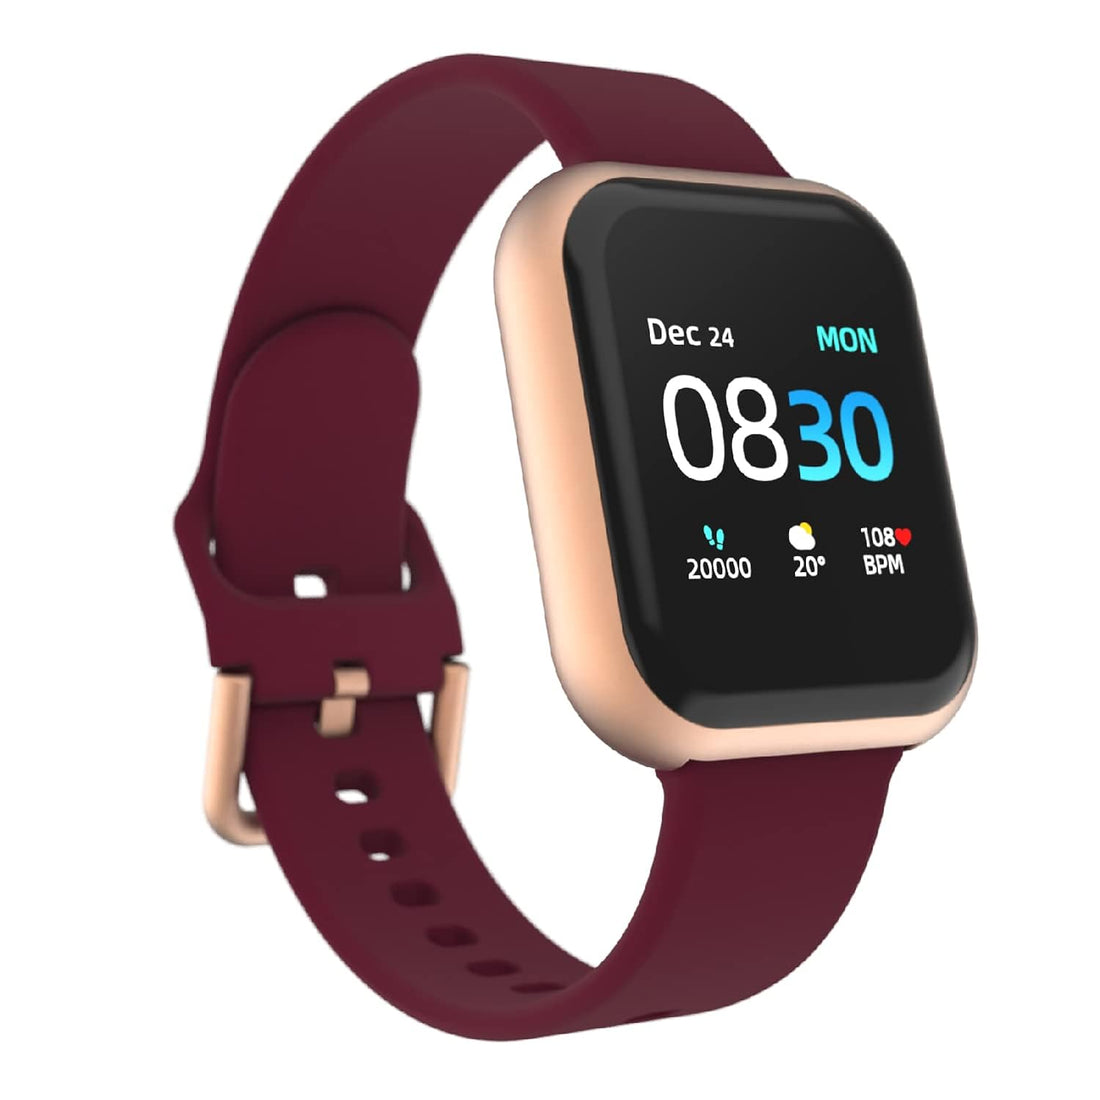 iTouch Air 3 Smartwatch for Fitness, iPhone and Android Compatible, Pedometer, Walking and Running Tracker for Women and Men (Merlot/Rose Gold)